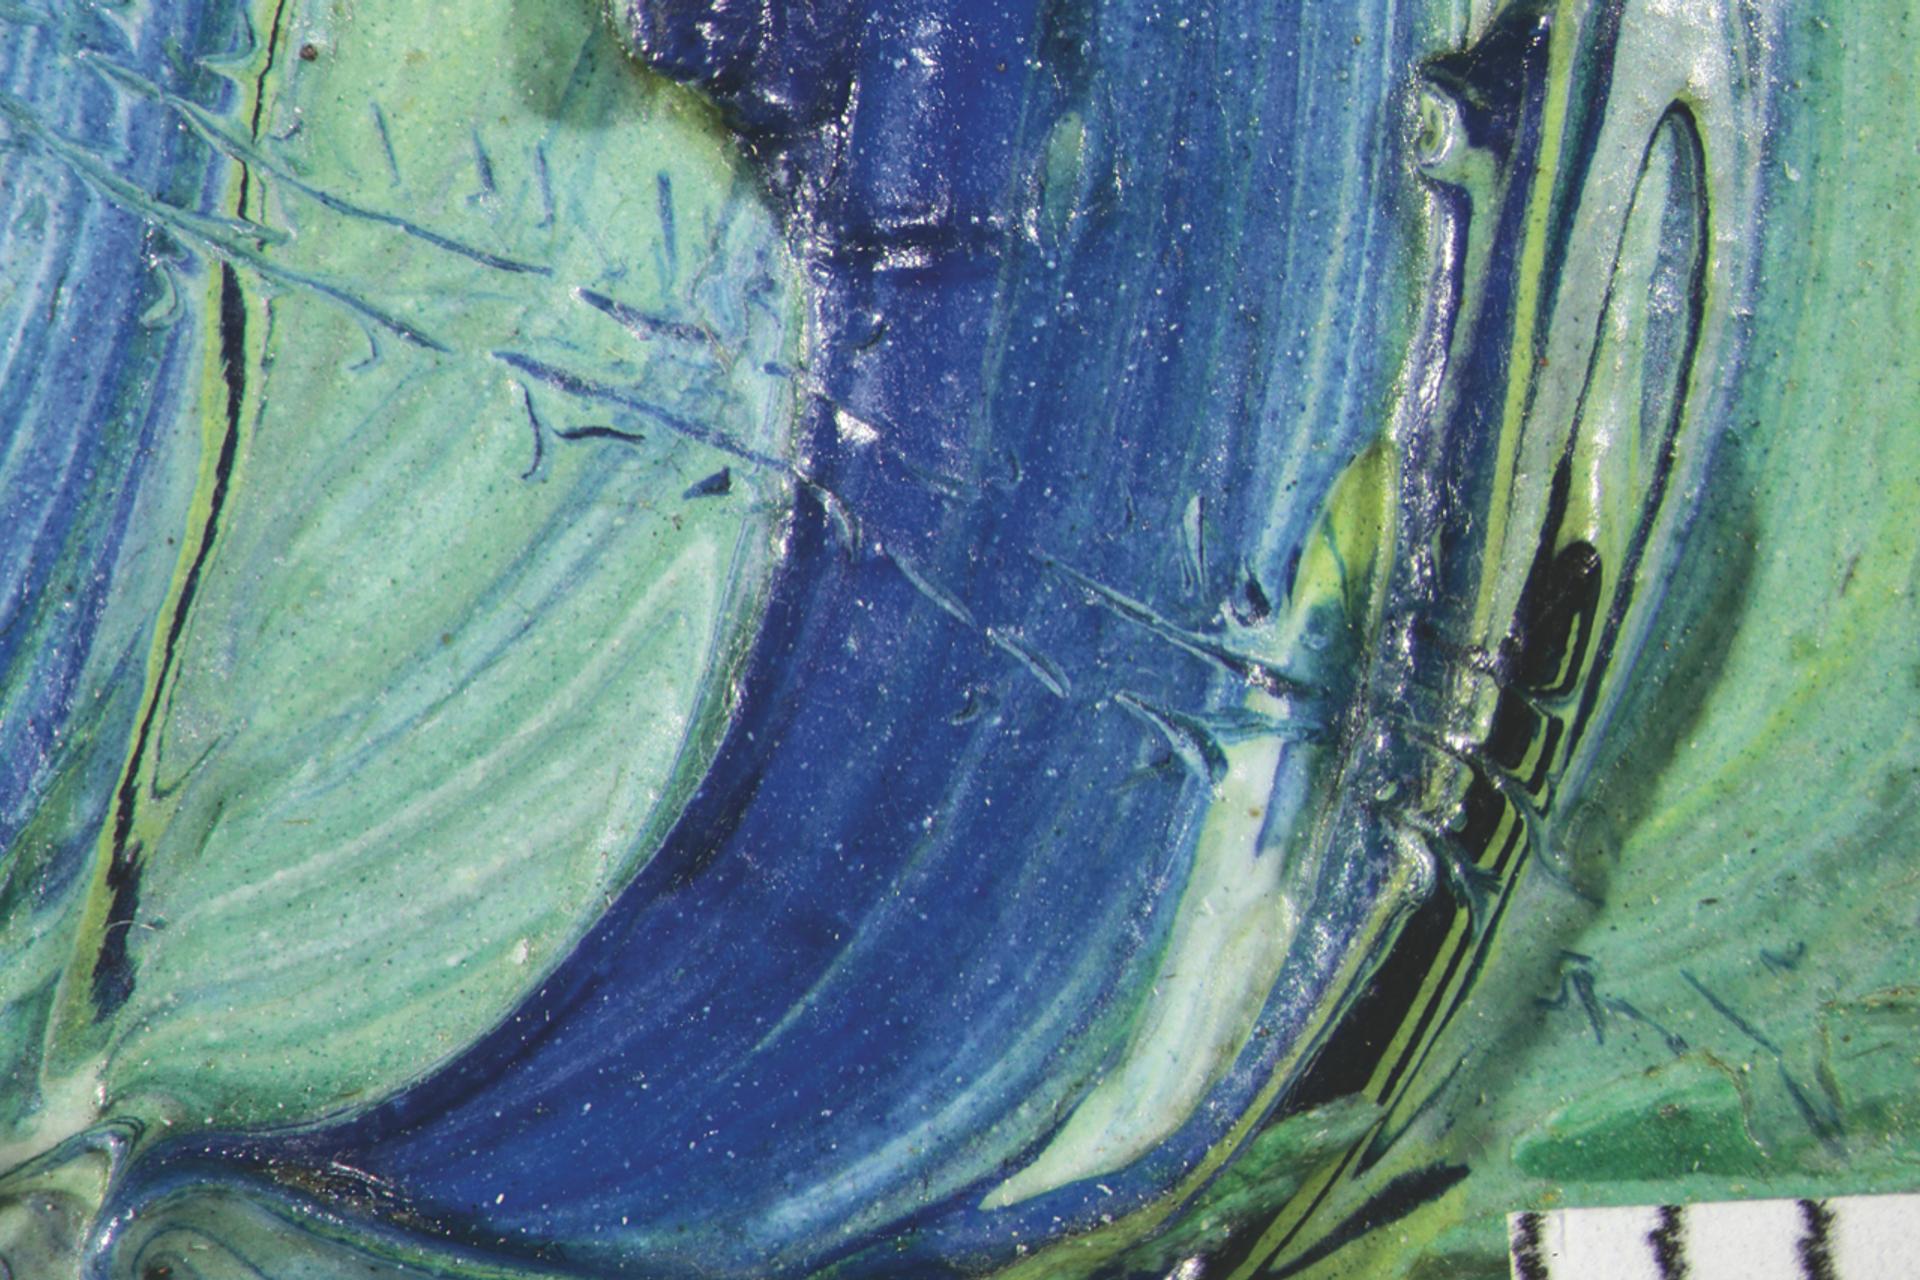 Traces of an insect walking through the paint, a detail from Van Gogh’s Olive Grove (July 1889) Courtesy of the Kröller-Müller Museum, Otterlo; photomicrograph: Margje Leeuwestein